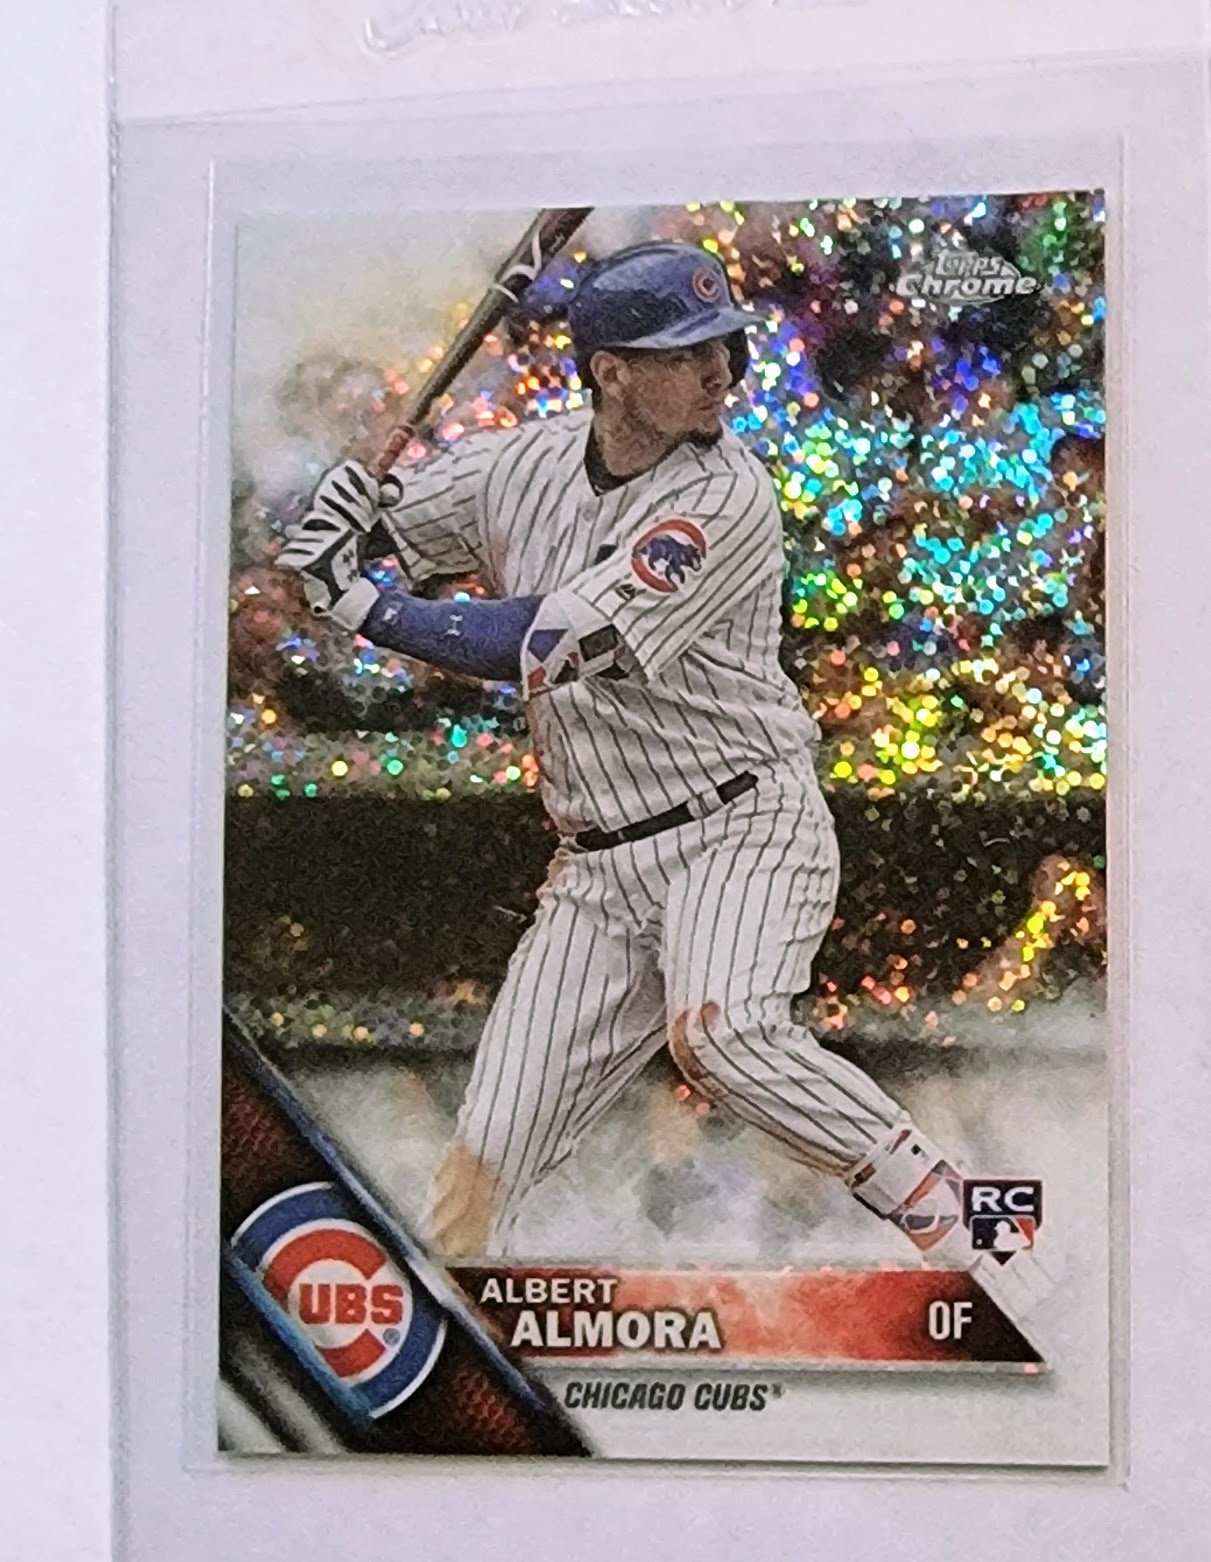 2016 Topps Chrome Update Albert Almora Sparkle Rookie Refractor Baseball Card TPTV simple Xclusive Collectibles   